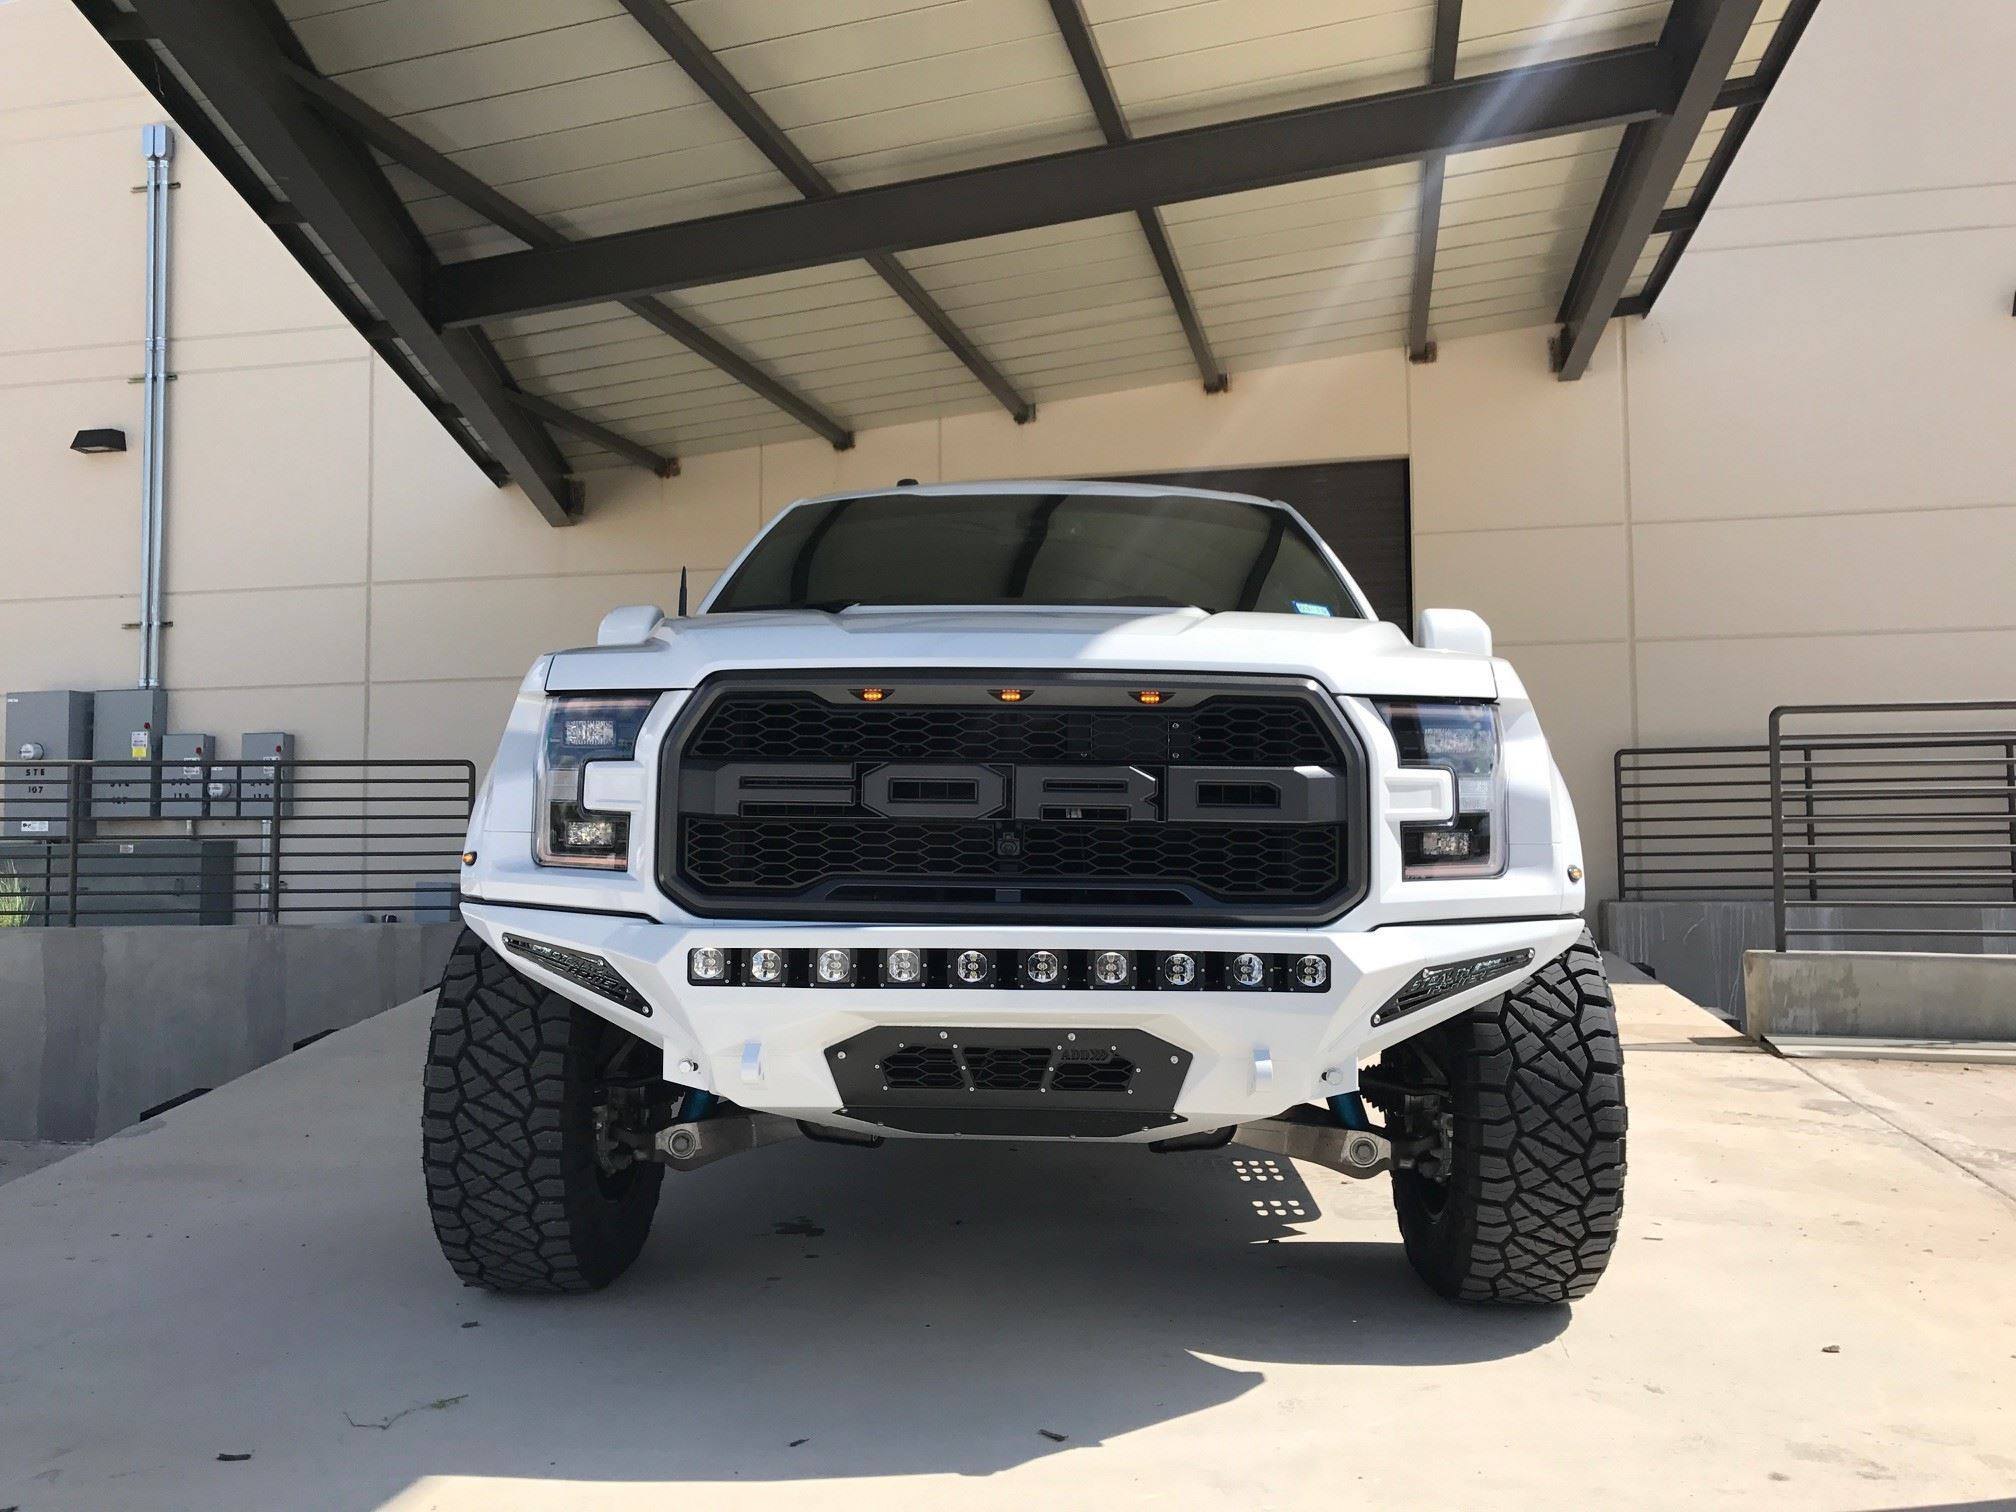 White Lifted Ford F-150 with Blacked Out Mesh Grille - Photo by Addictive Desert Designs